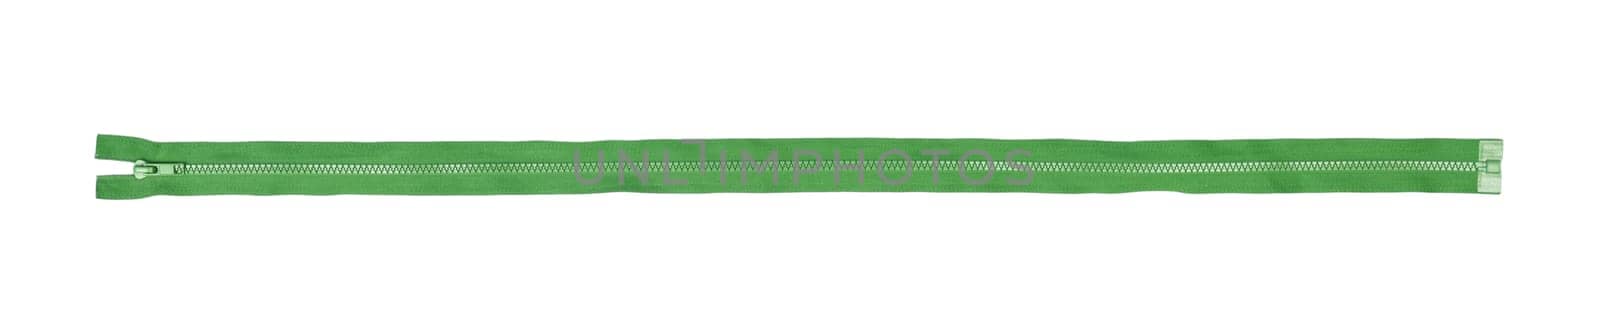 green Zipper isolated on white backgroun, top view.